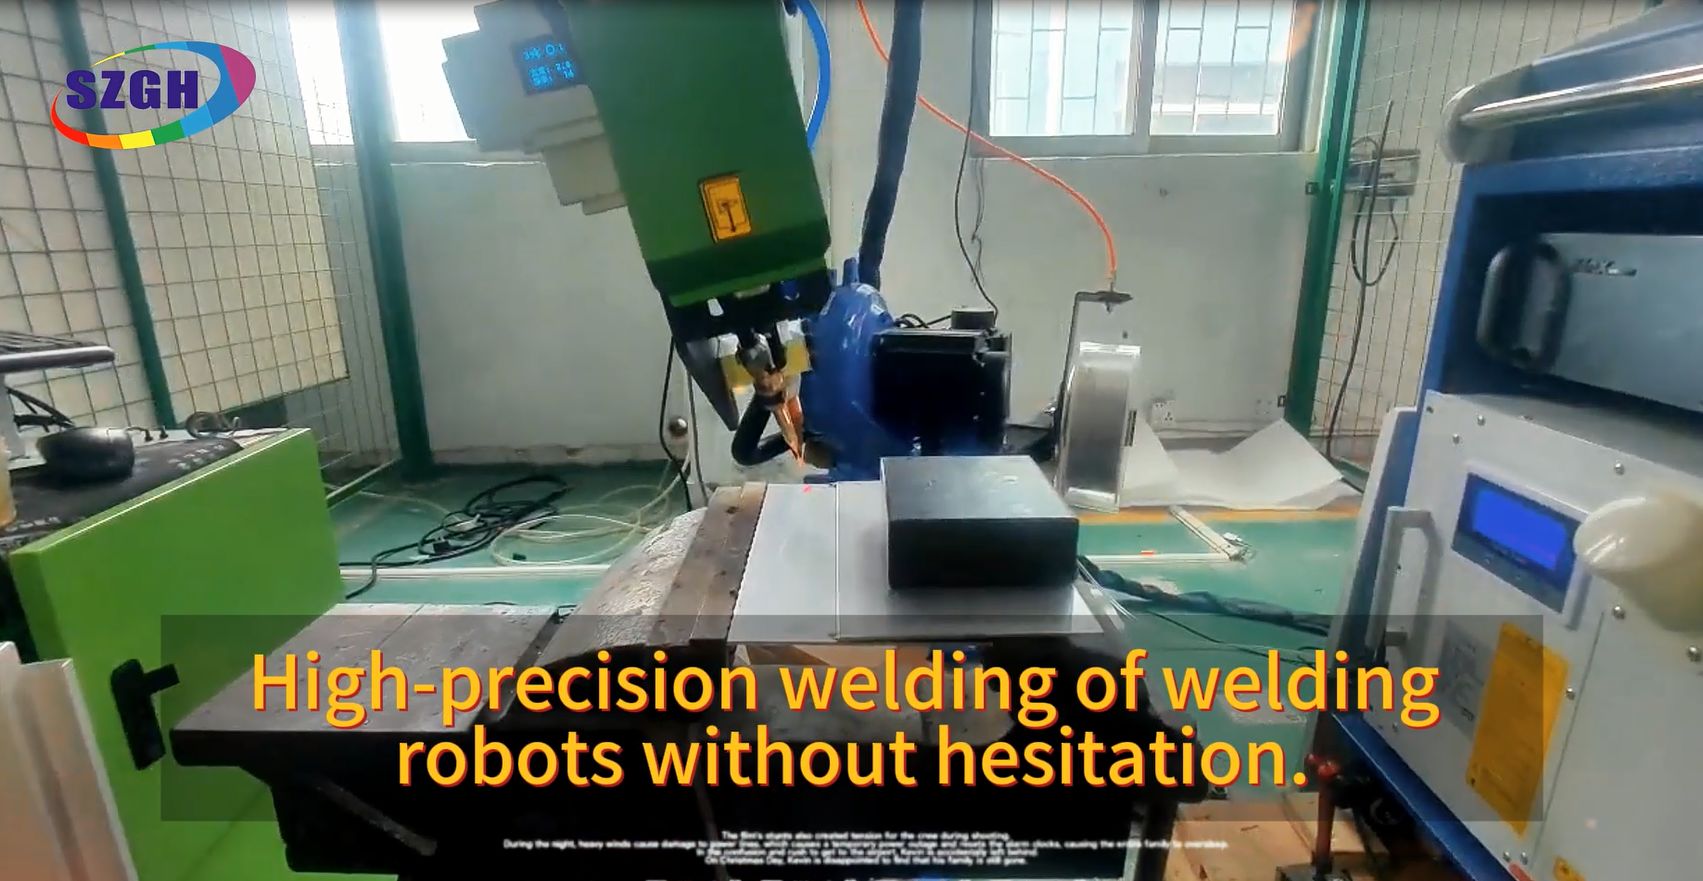 Traditional welding is far inferior to welding robots with laser scanning?